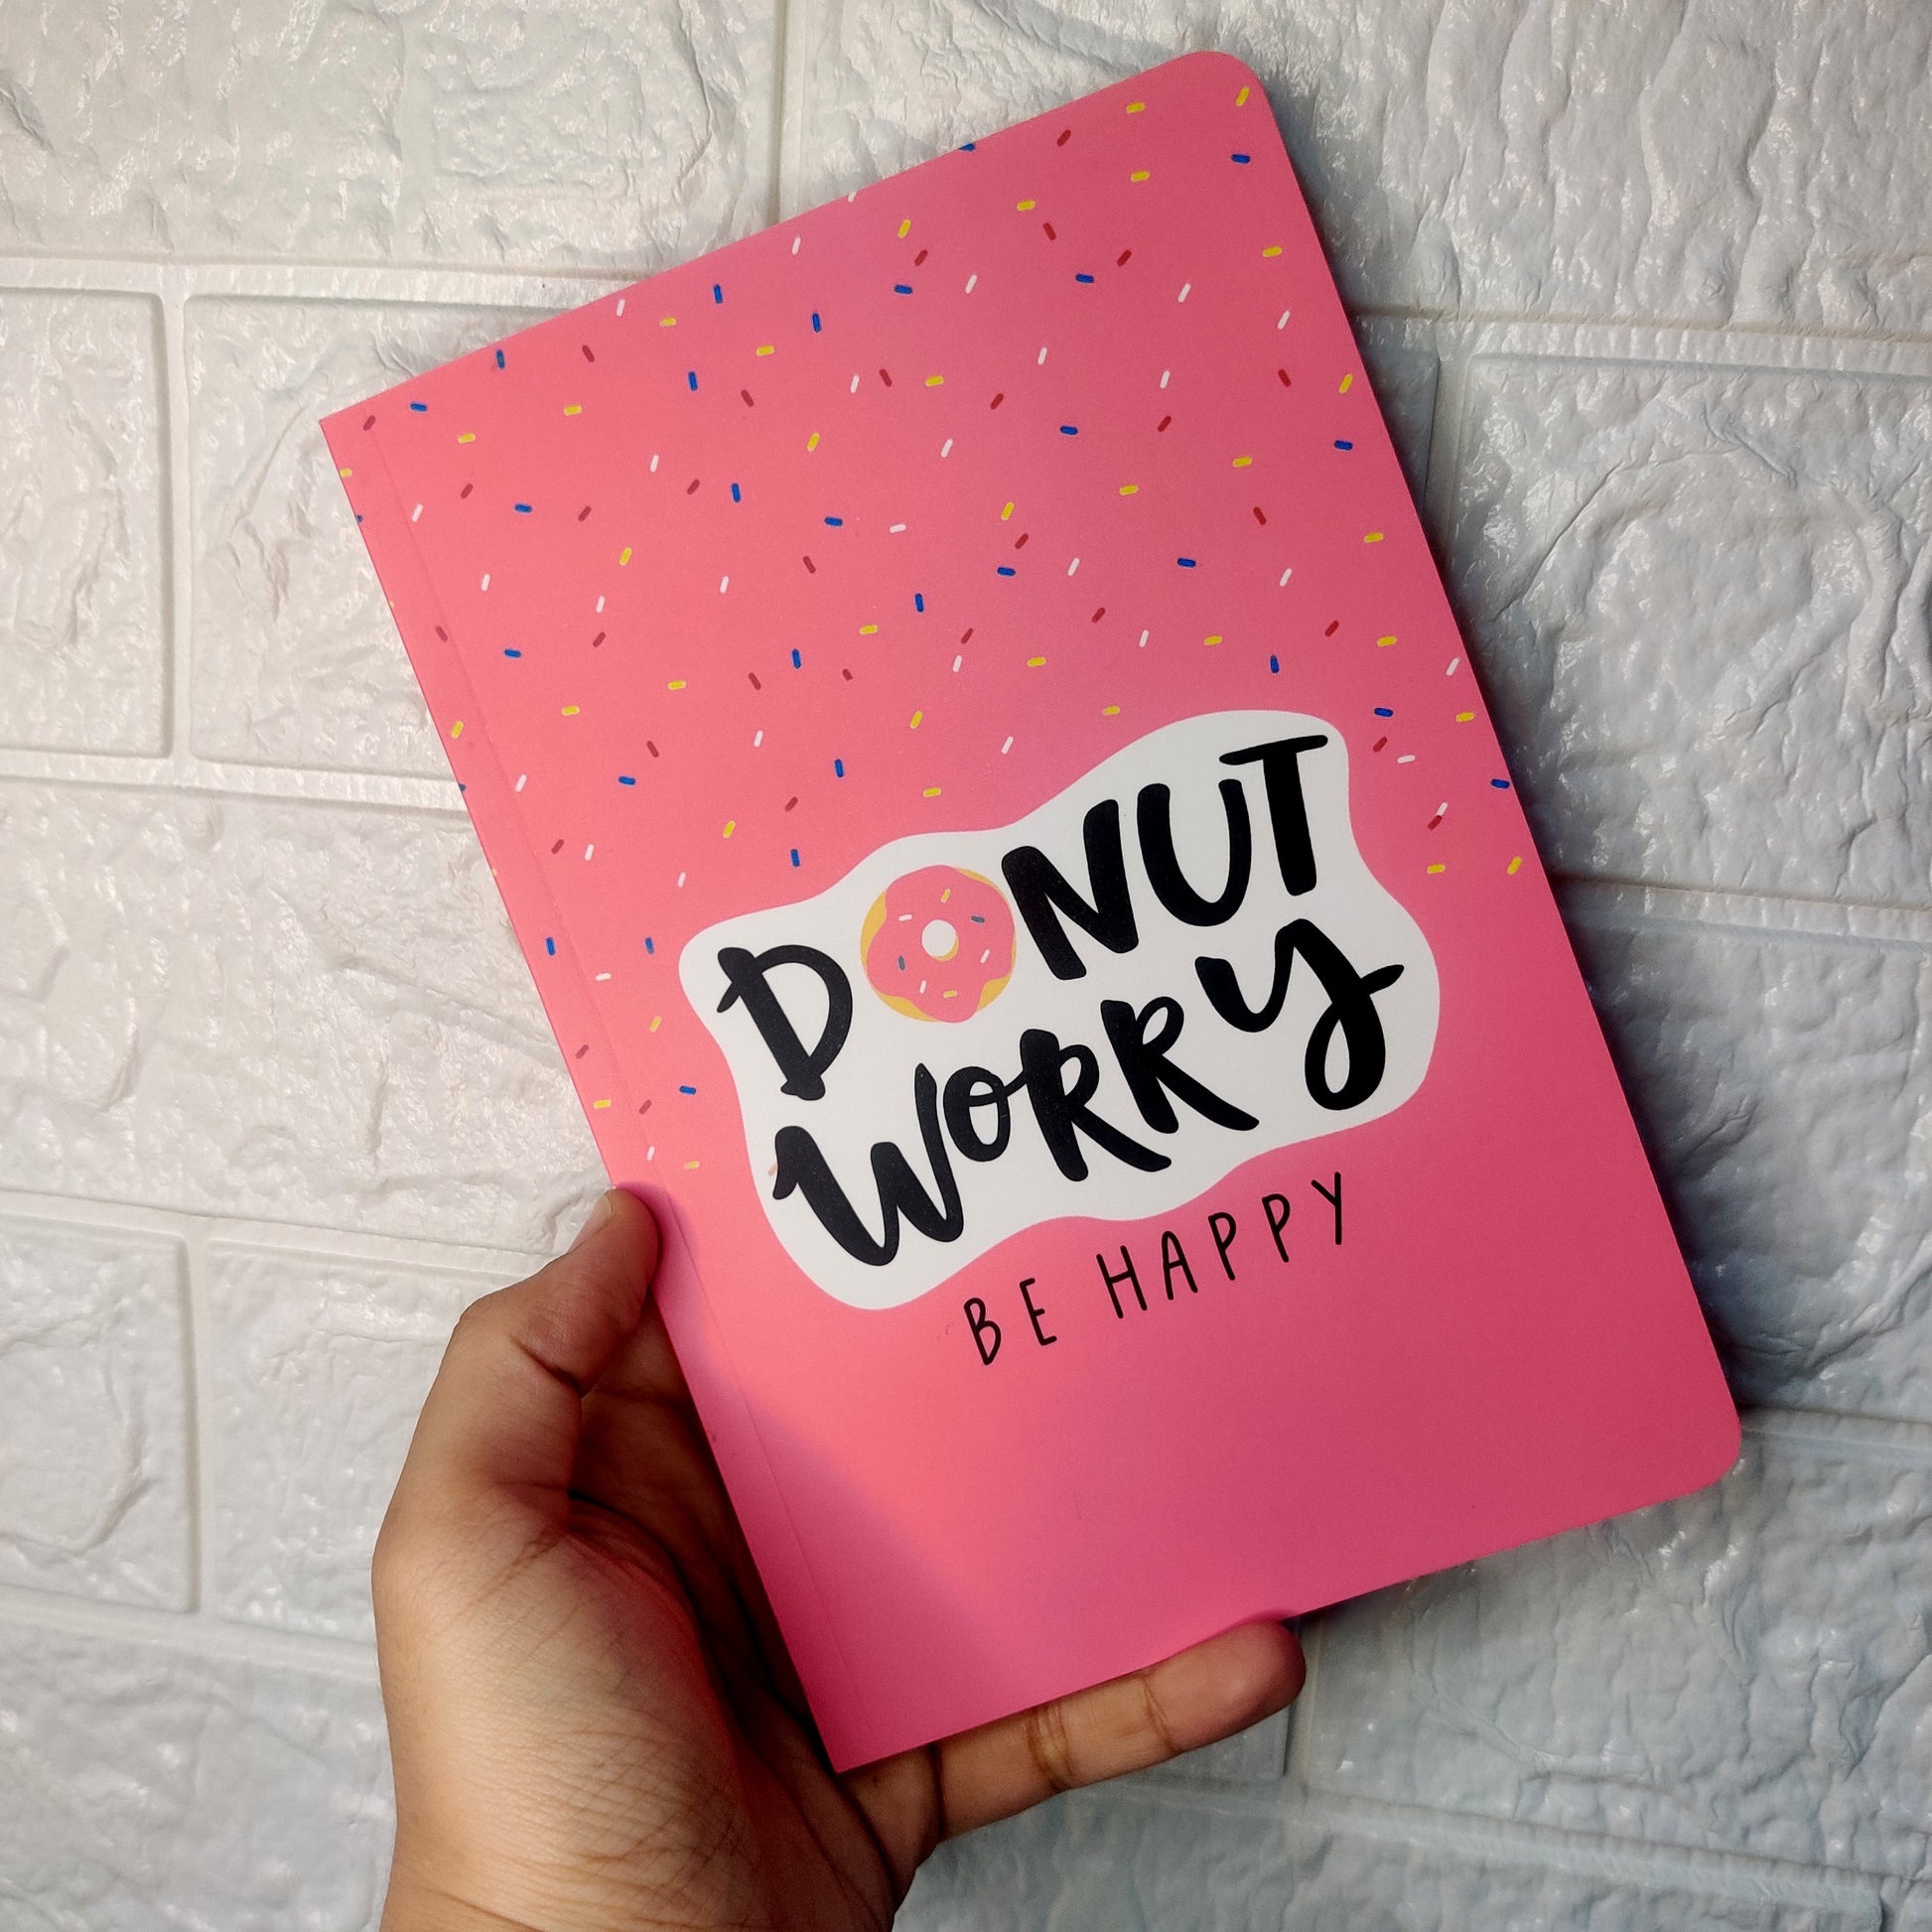 Donut worry Notepad - The Umbrella store